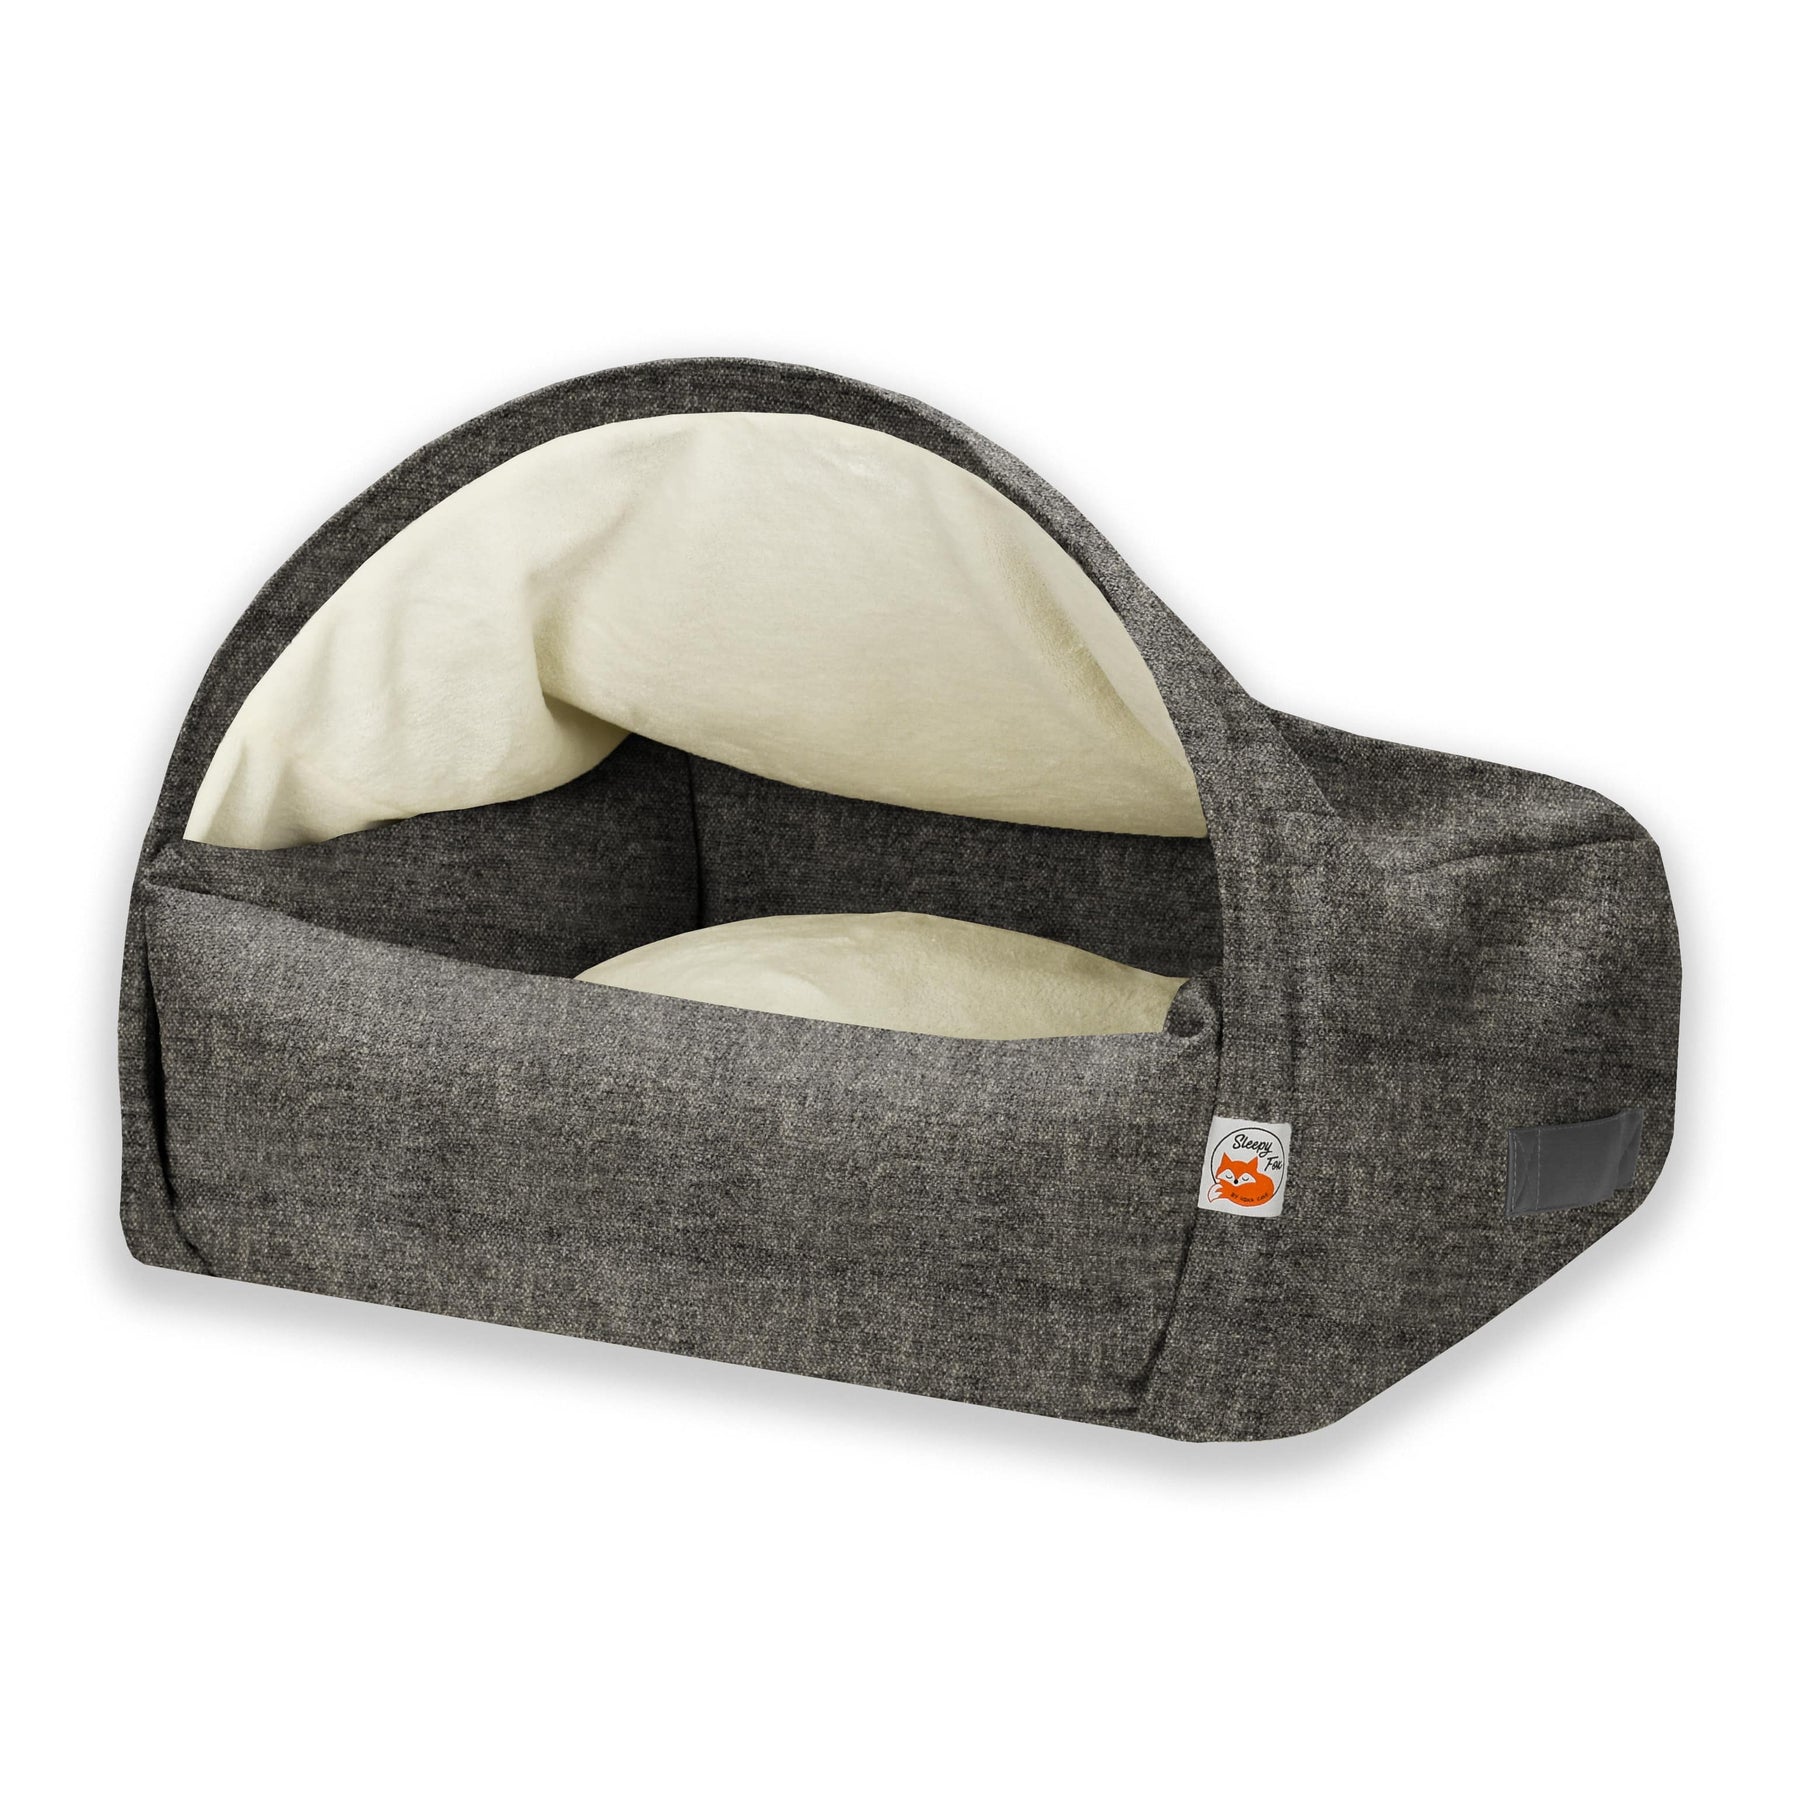 Sleepy Fox® - Europe's Patented Anti-Anxiety Snuggle Cave Bed for Pets